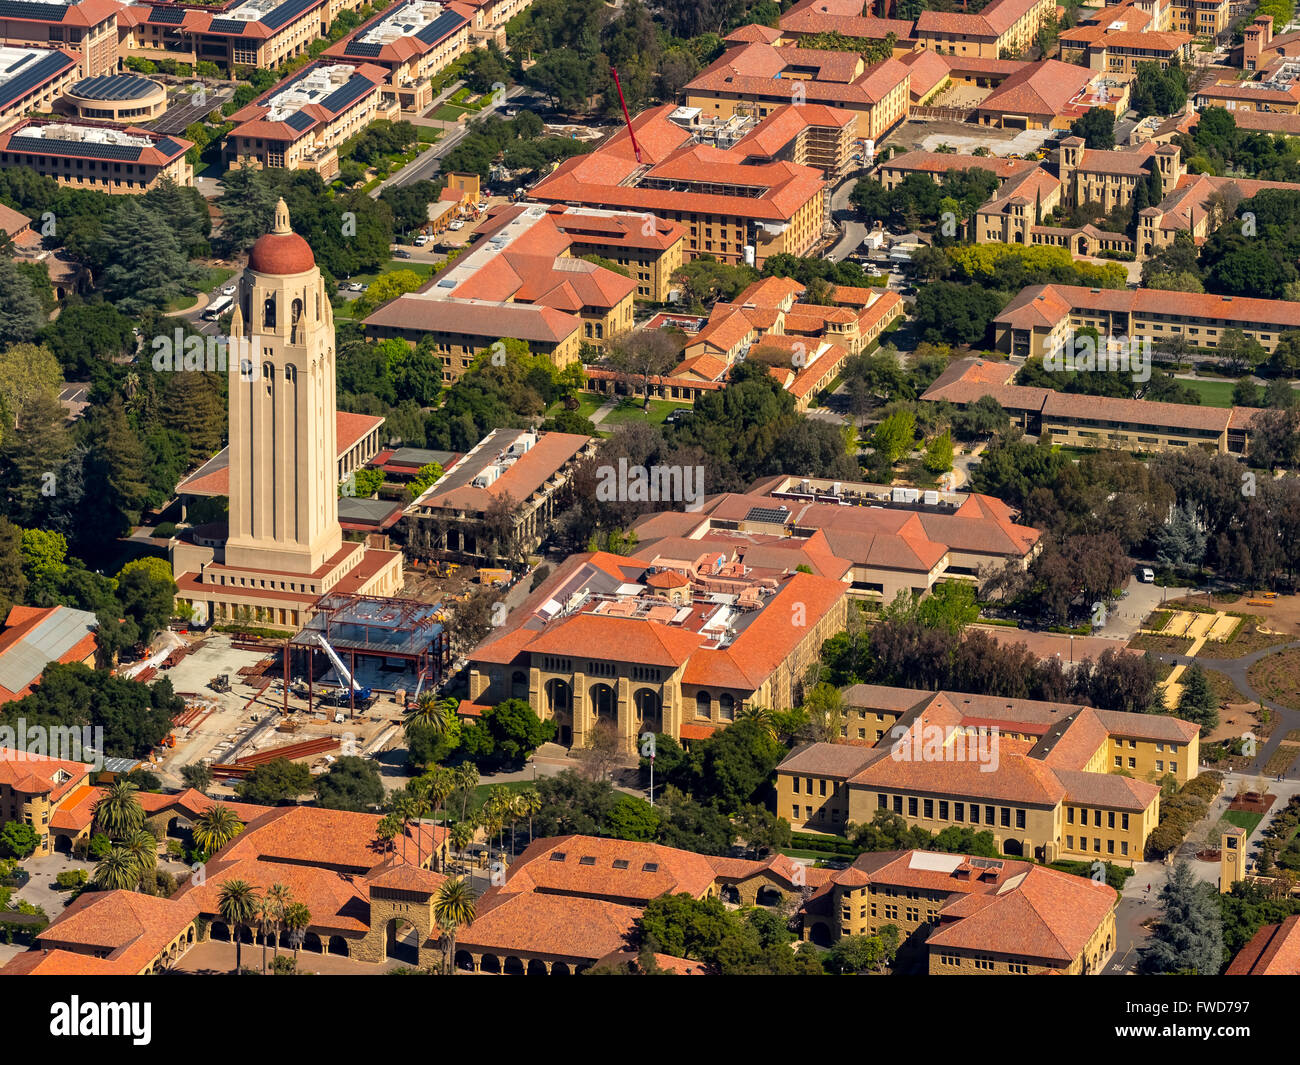 Stanford University campus Palo Alto California, Hoover Tower, campus, Silicon Valley, California, USA, aerial view, Stock Photo